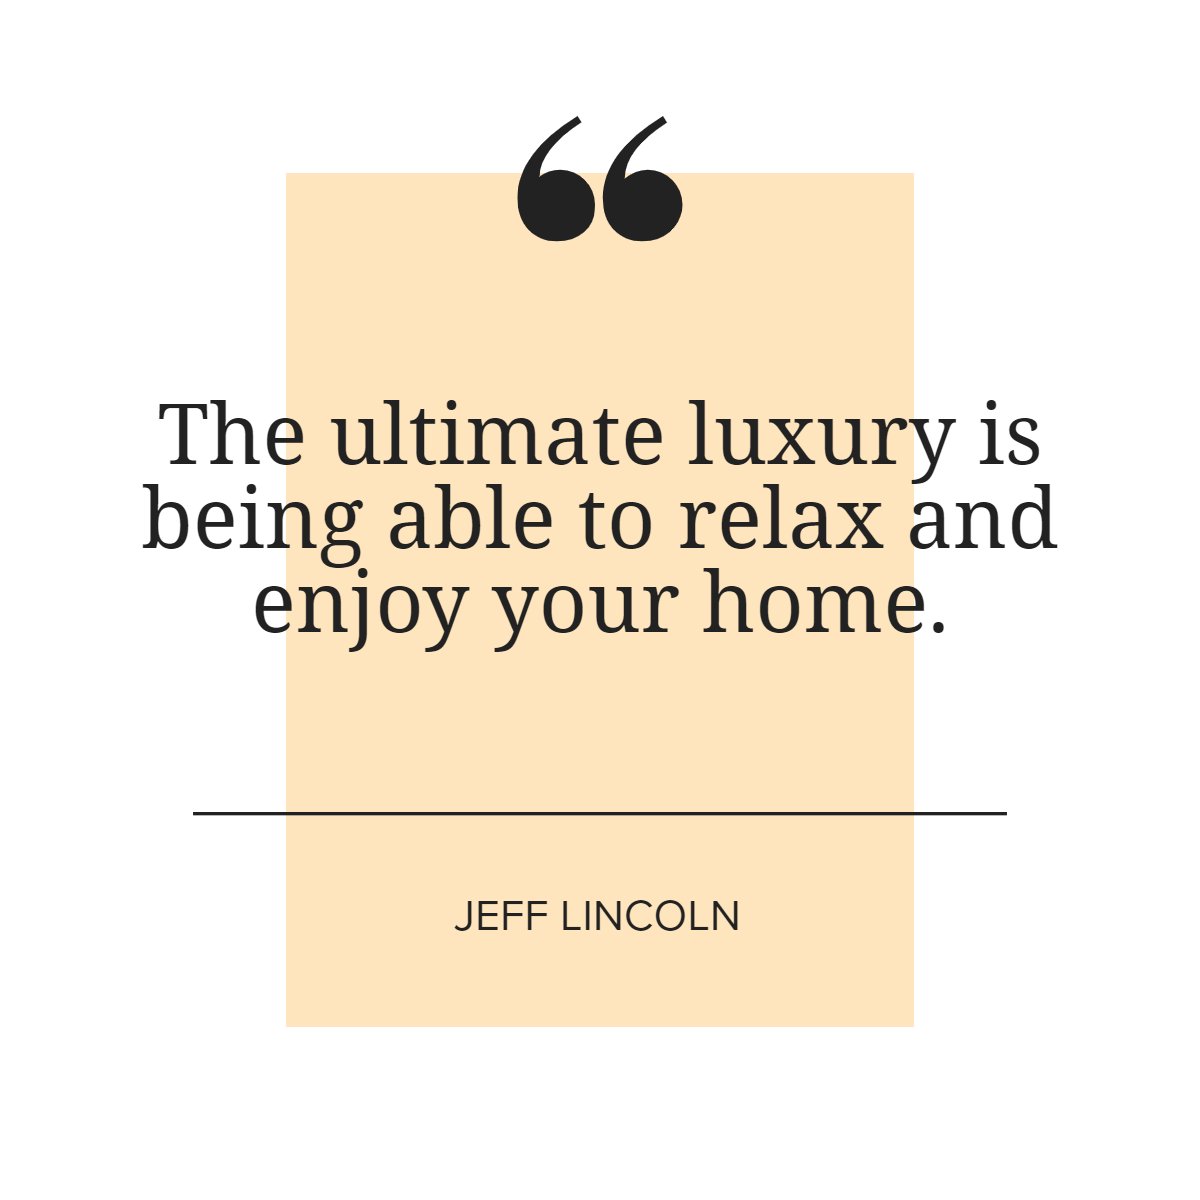 'The ultimate luxury is being able to relax and enjoy your home'
― Jeff Lincoln 📖

#luxurylifestyle #luxury #home #lifestyle #jefflincoln #quote #quoteoftheday
 #SouthwestFlorida